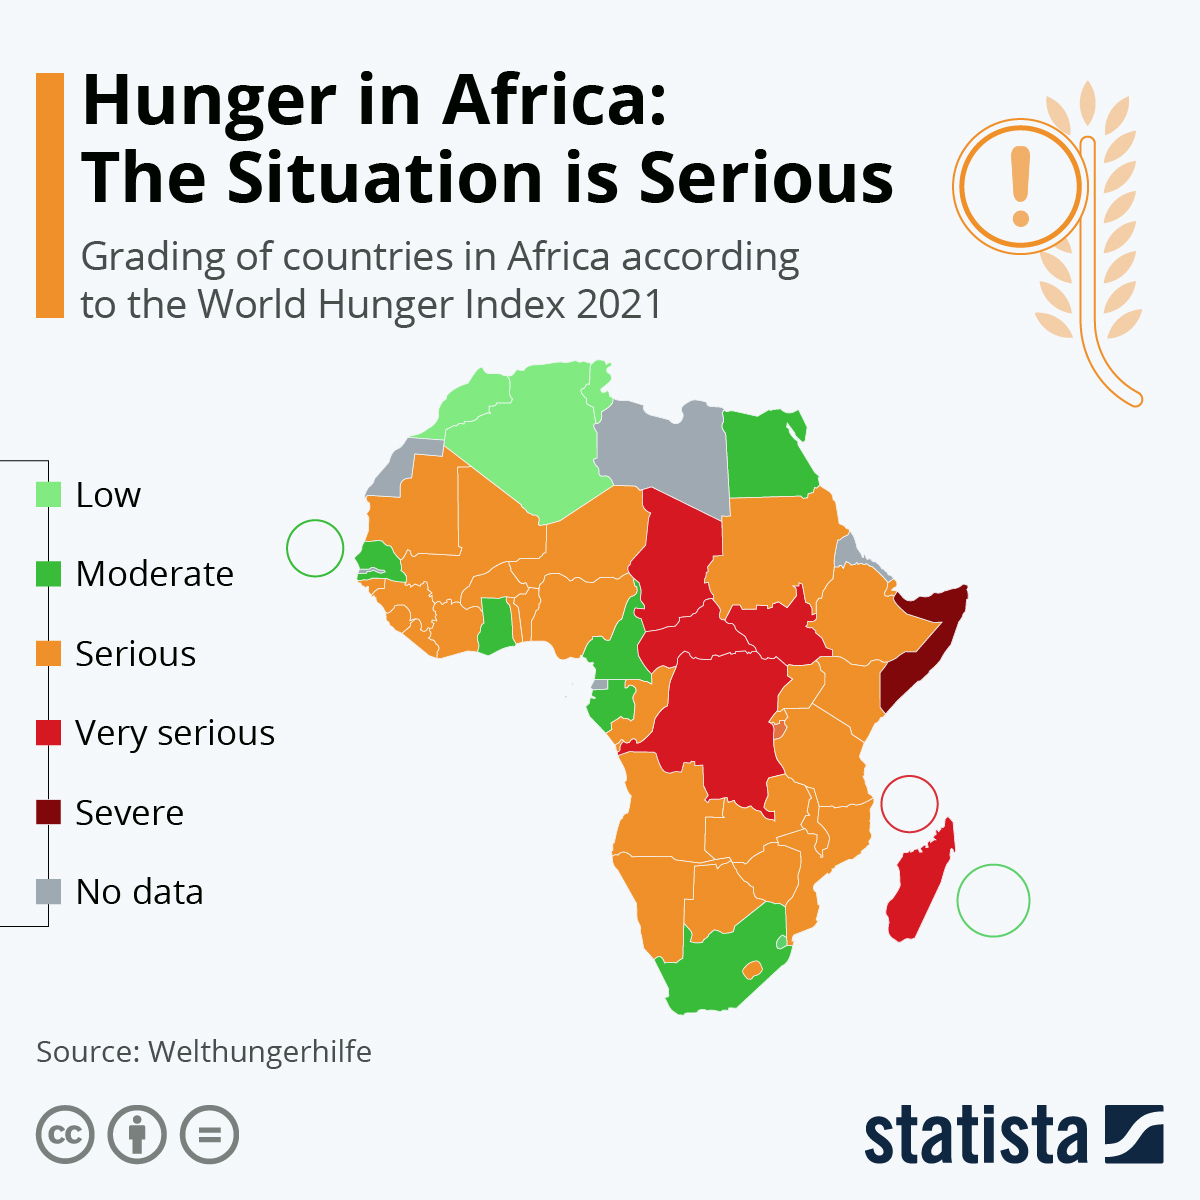 Map displaying the grading of countries in Africa according to the World Hunger Index 2021.